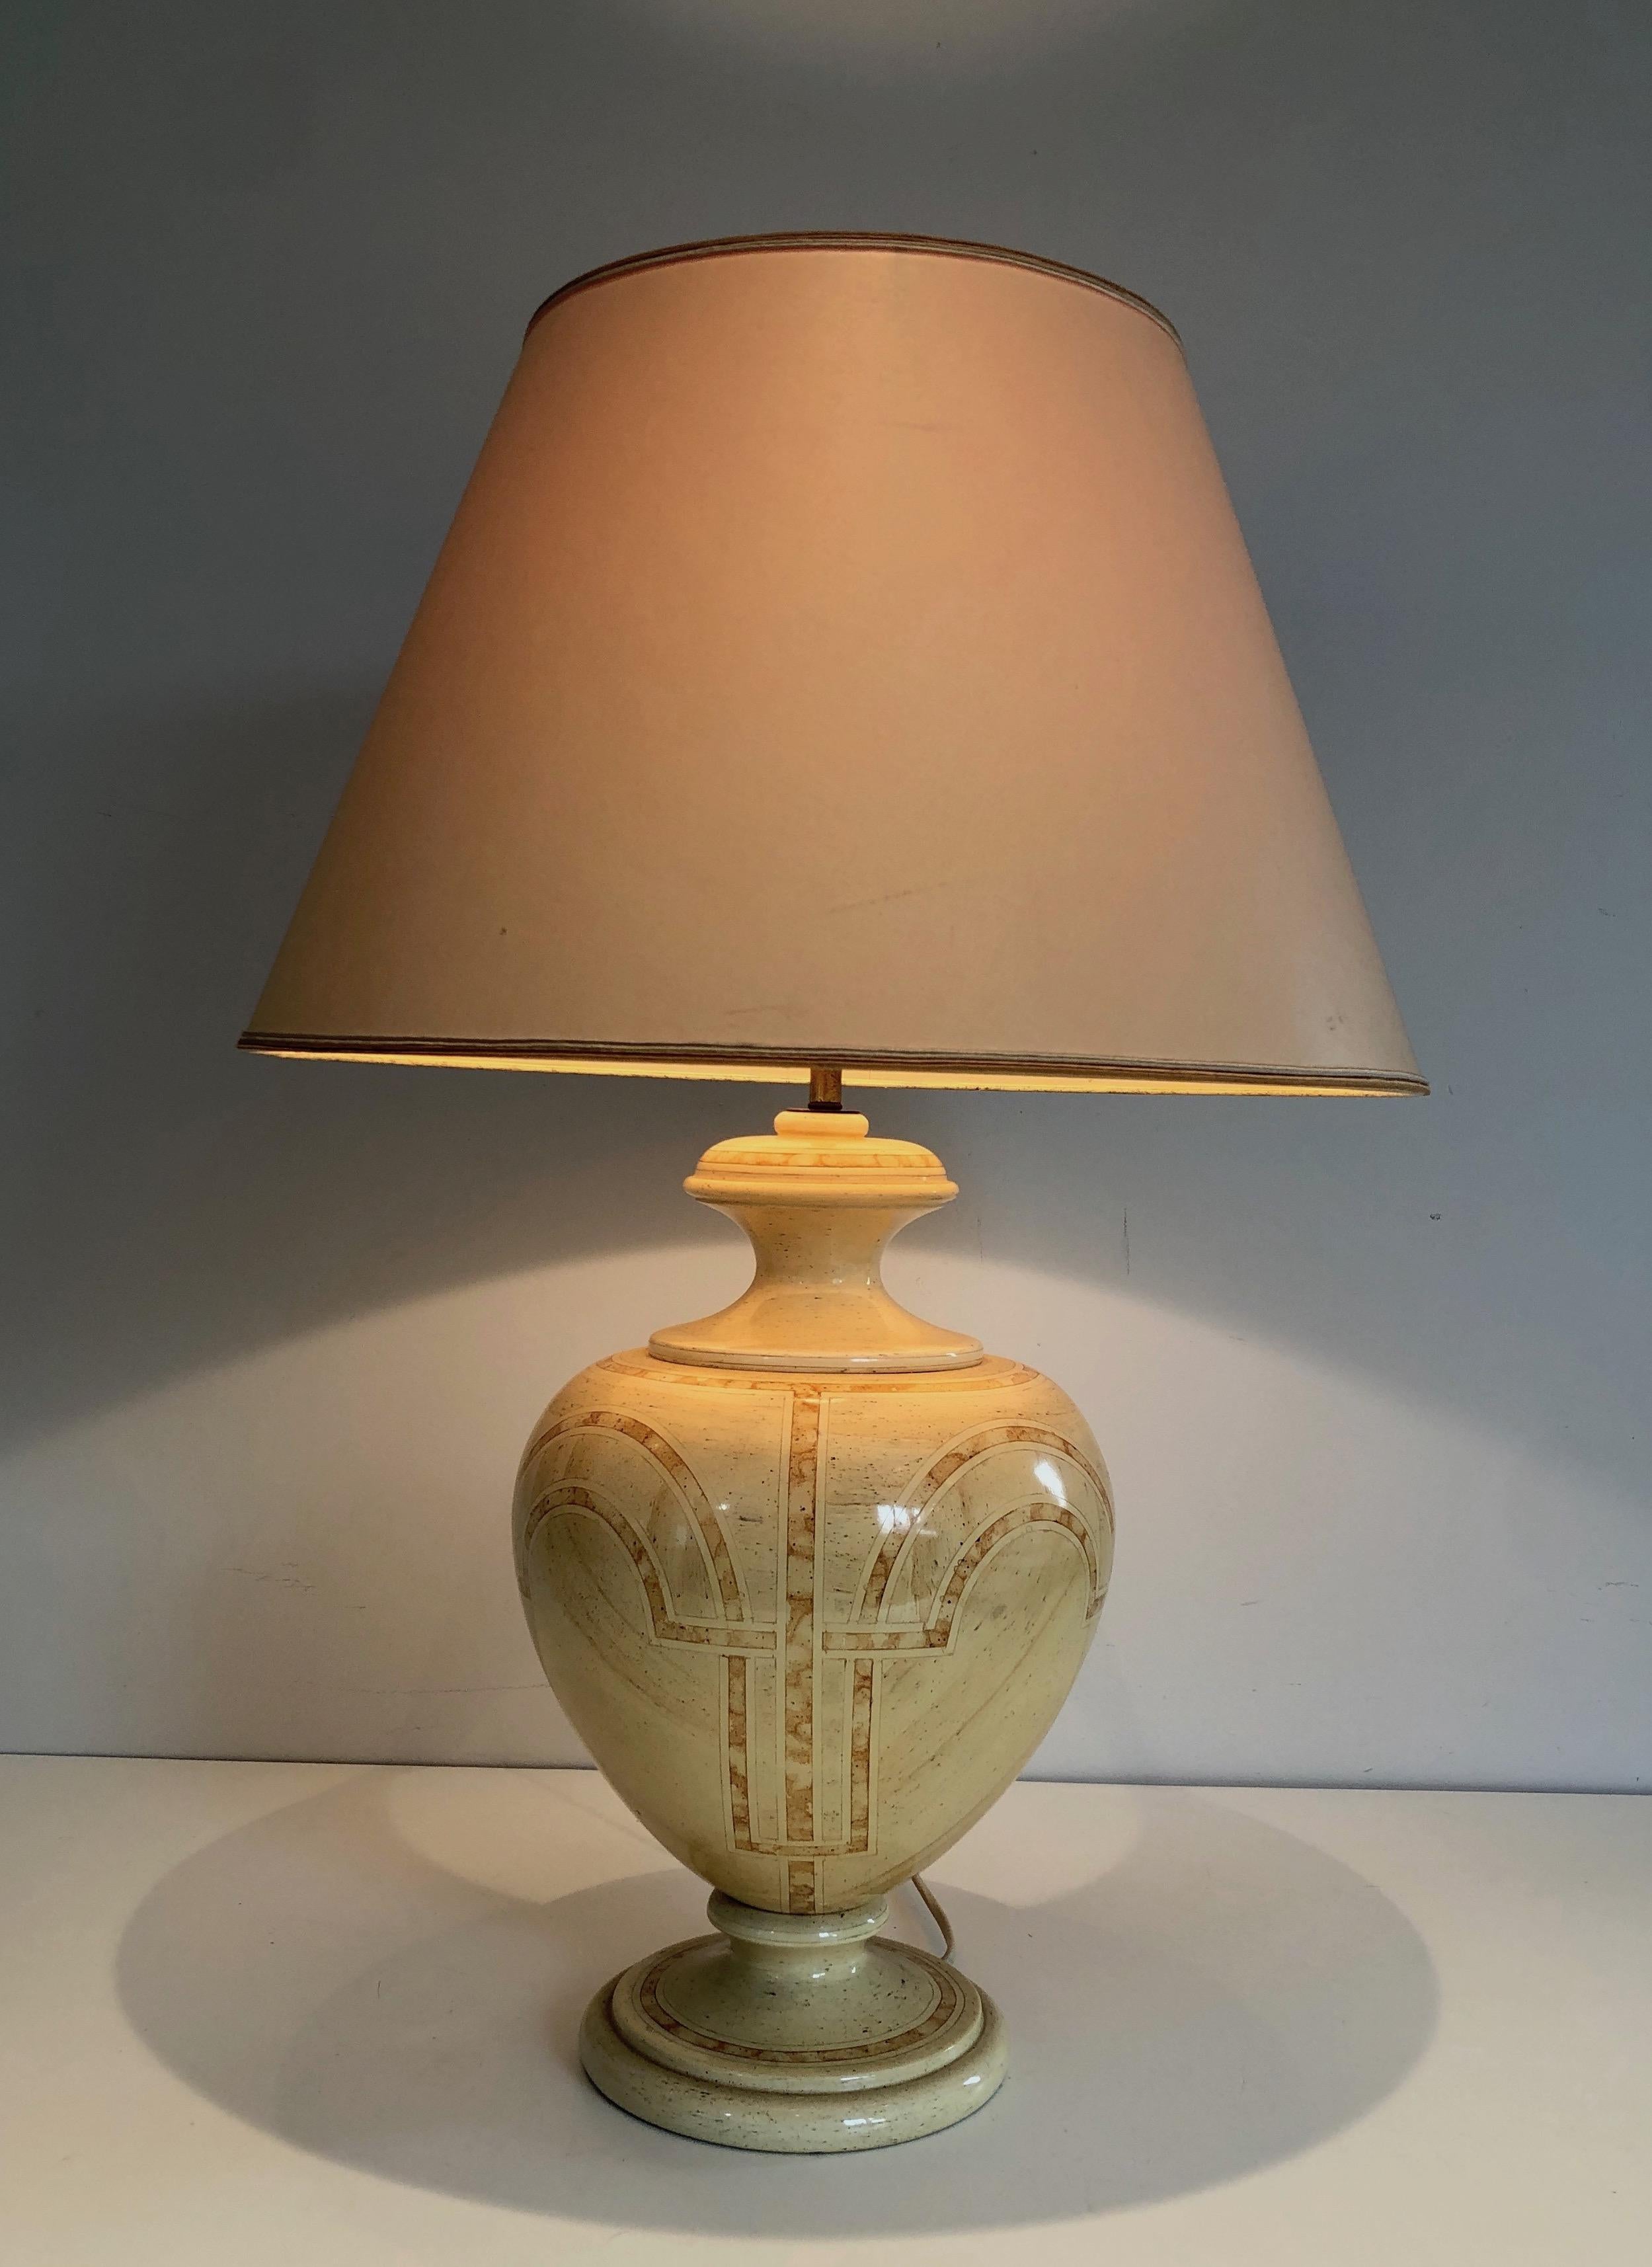 Eggshell lacquered table lamp with Interlacing. French work. Circa 1970.